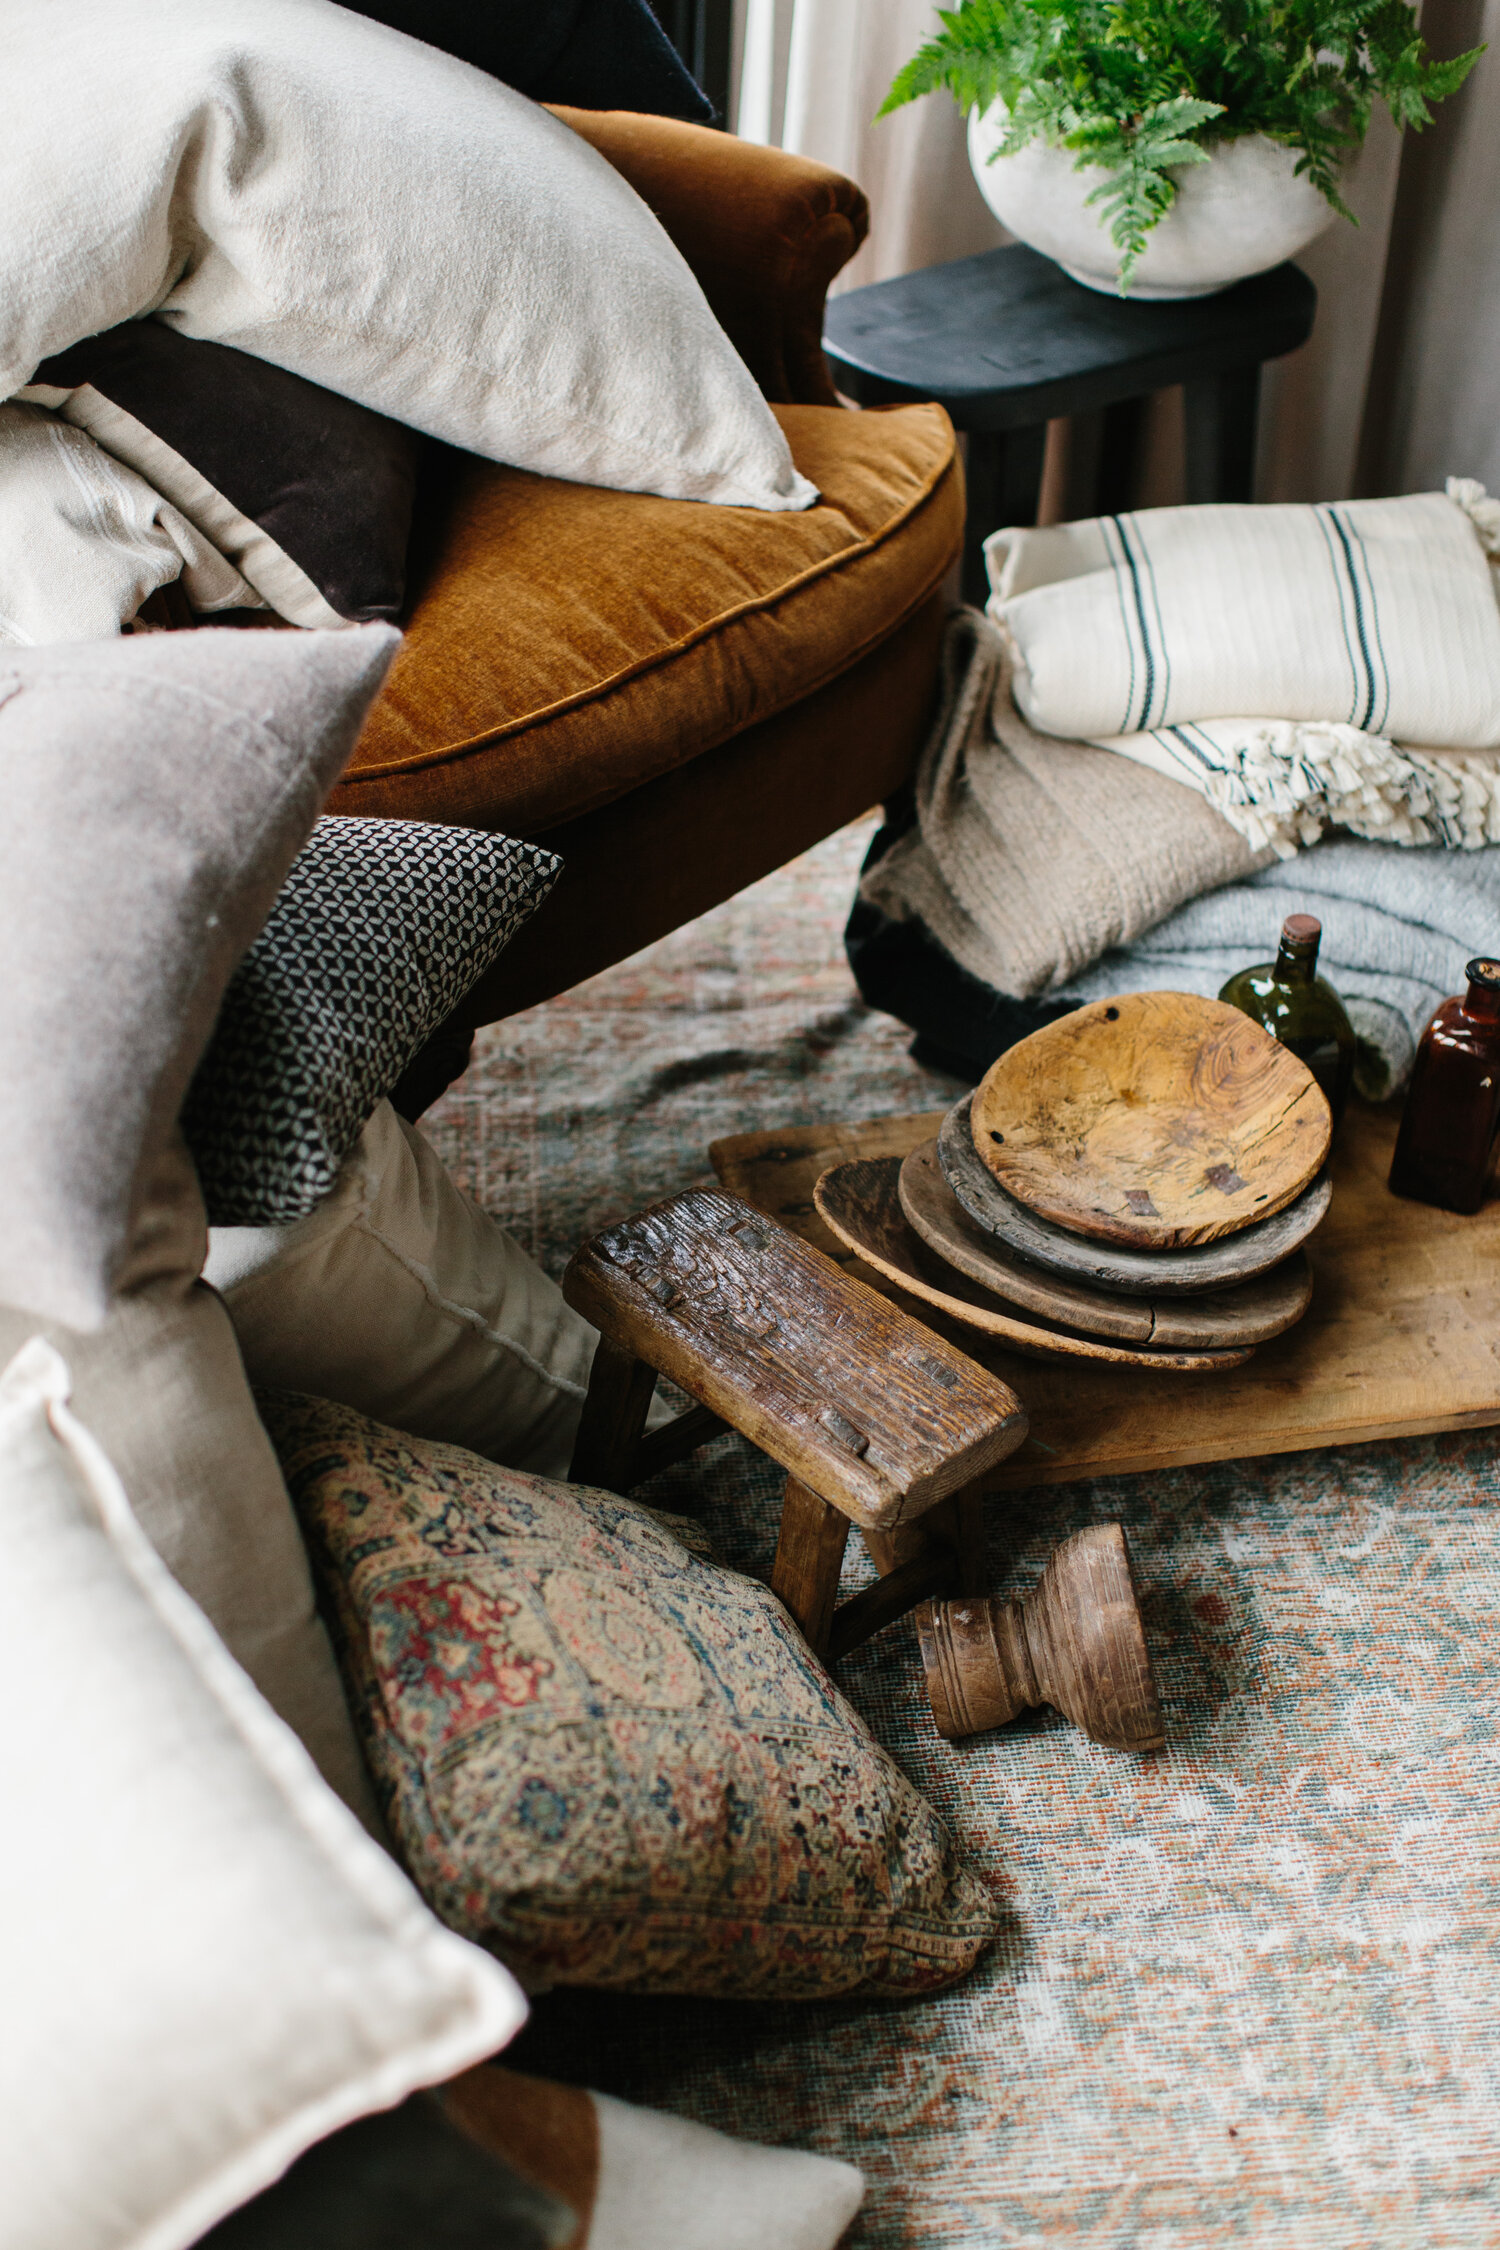 5 Things You Can Do to Instantly Increase Your Room's Vibration | lark & linen